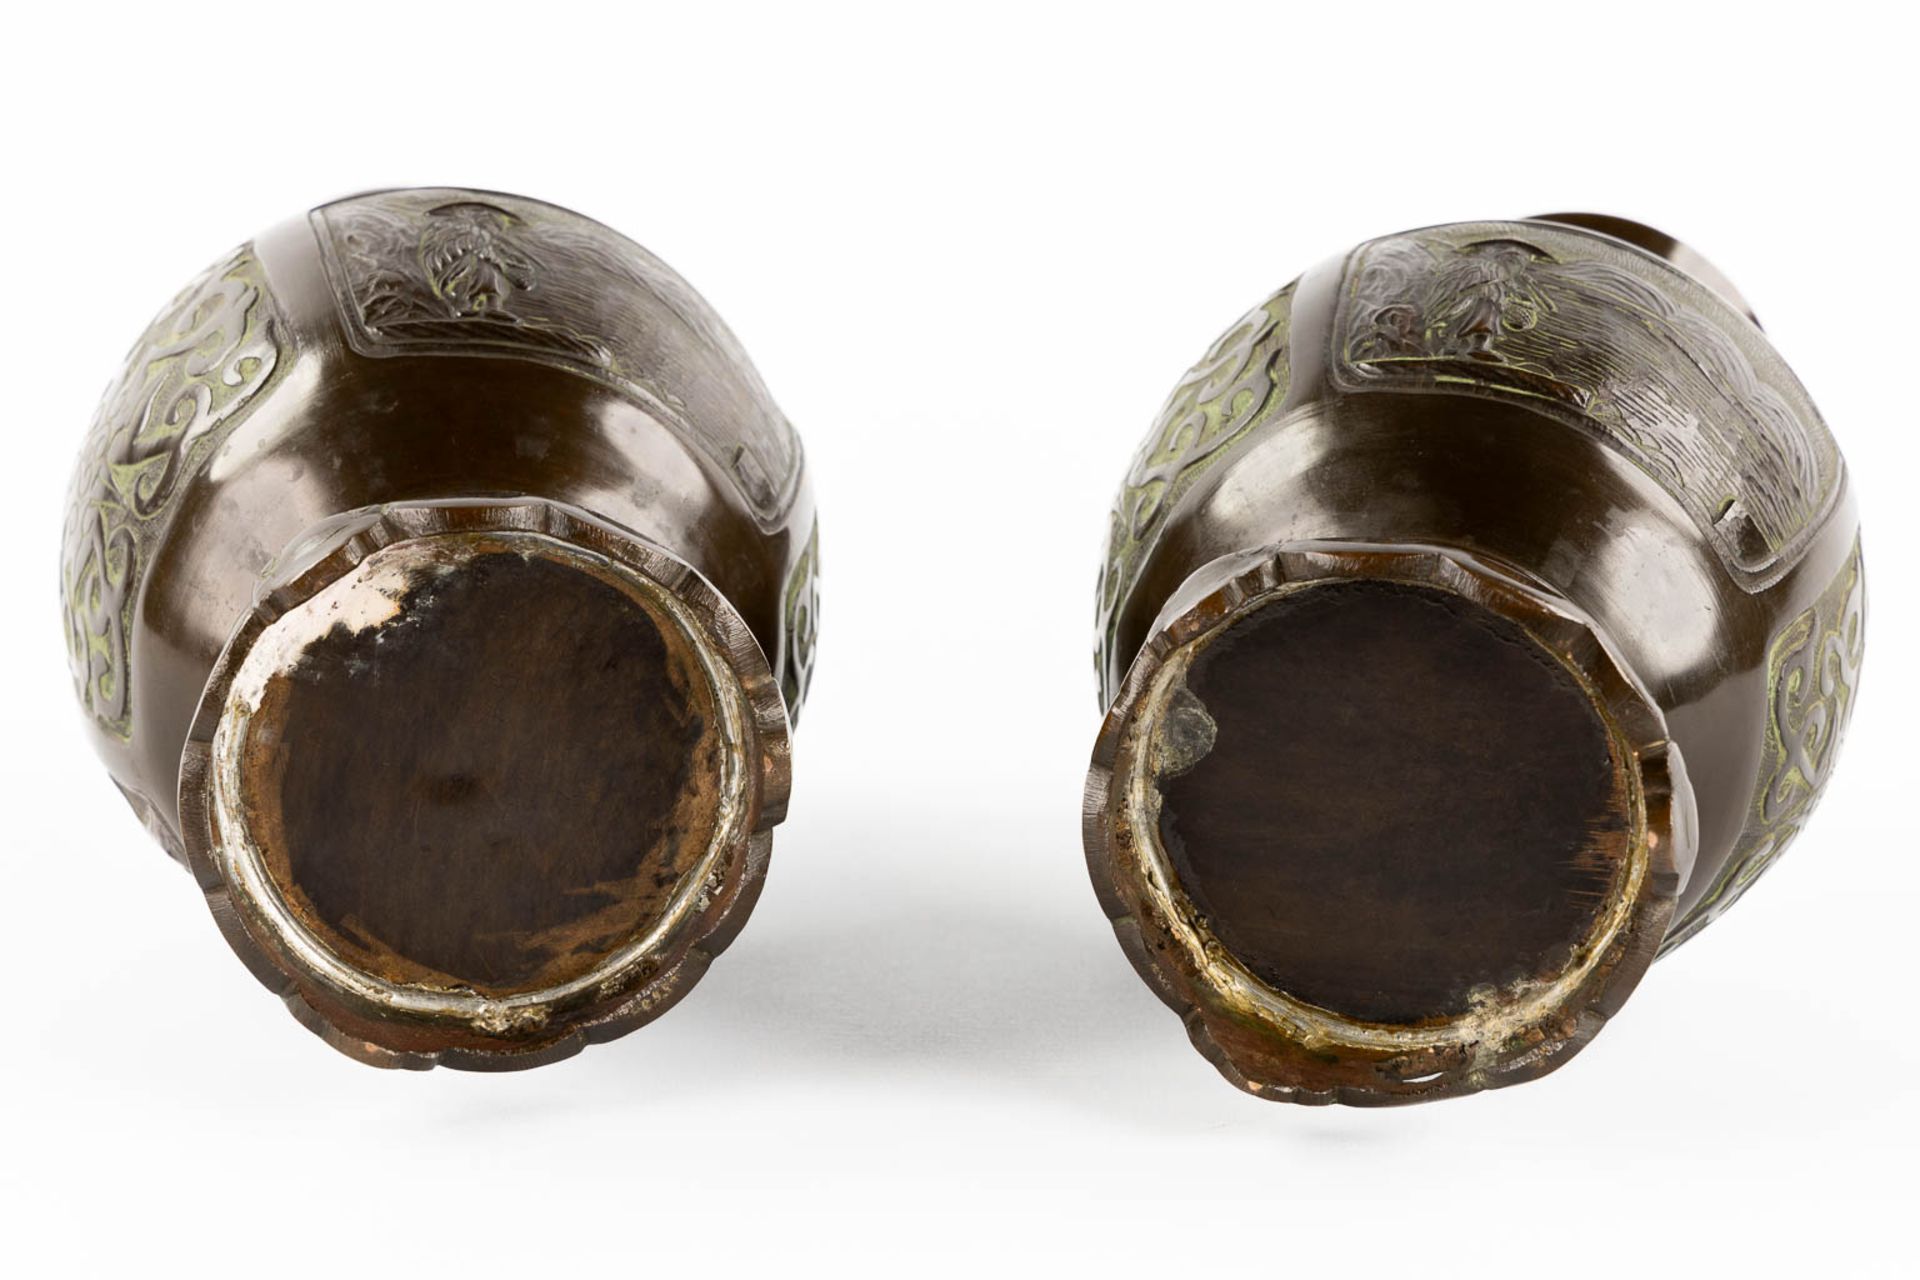 A pair of Japanese vases, patinated bronze. 19th C. (H:26 x D:14 cm) - Image 7 of 11